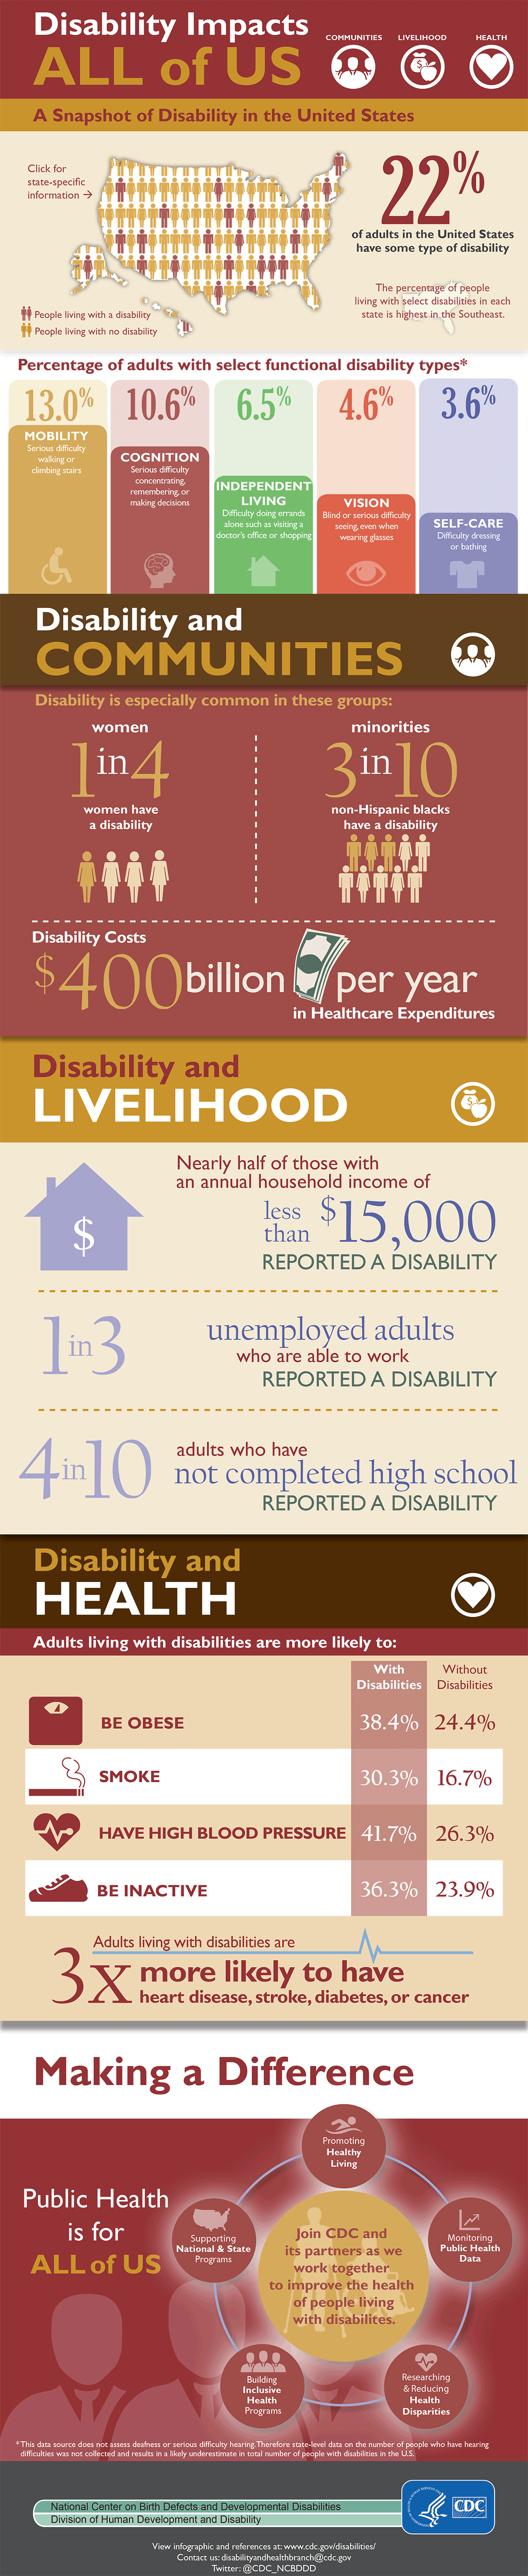 Disability impacts all of us infographic